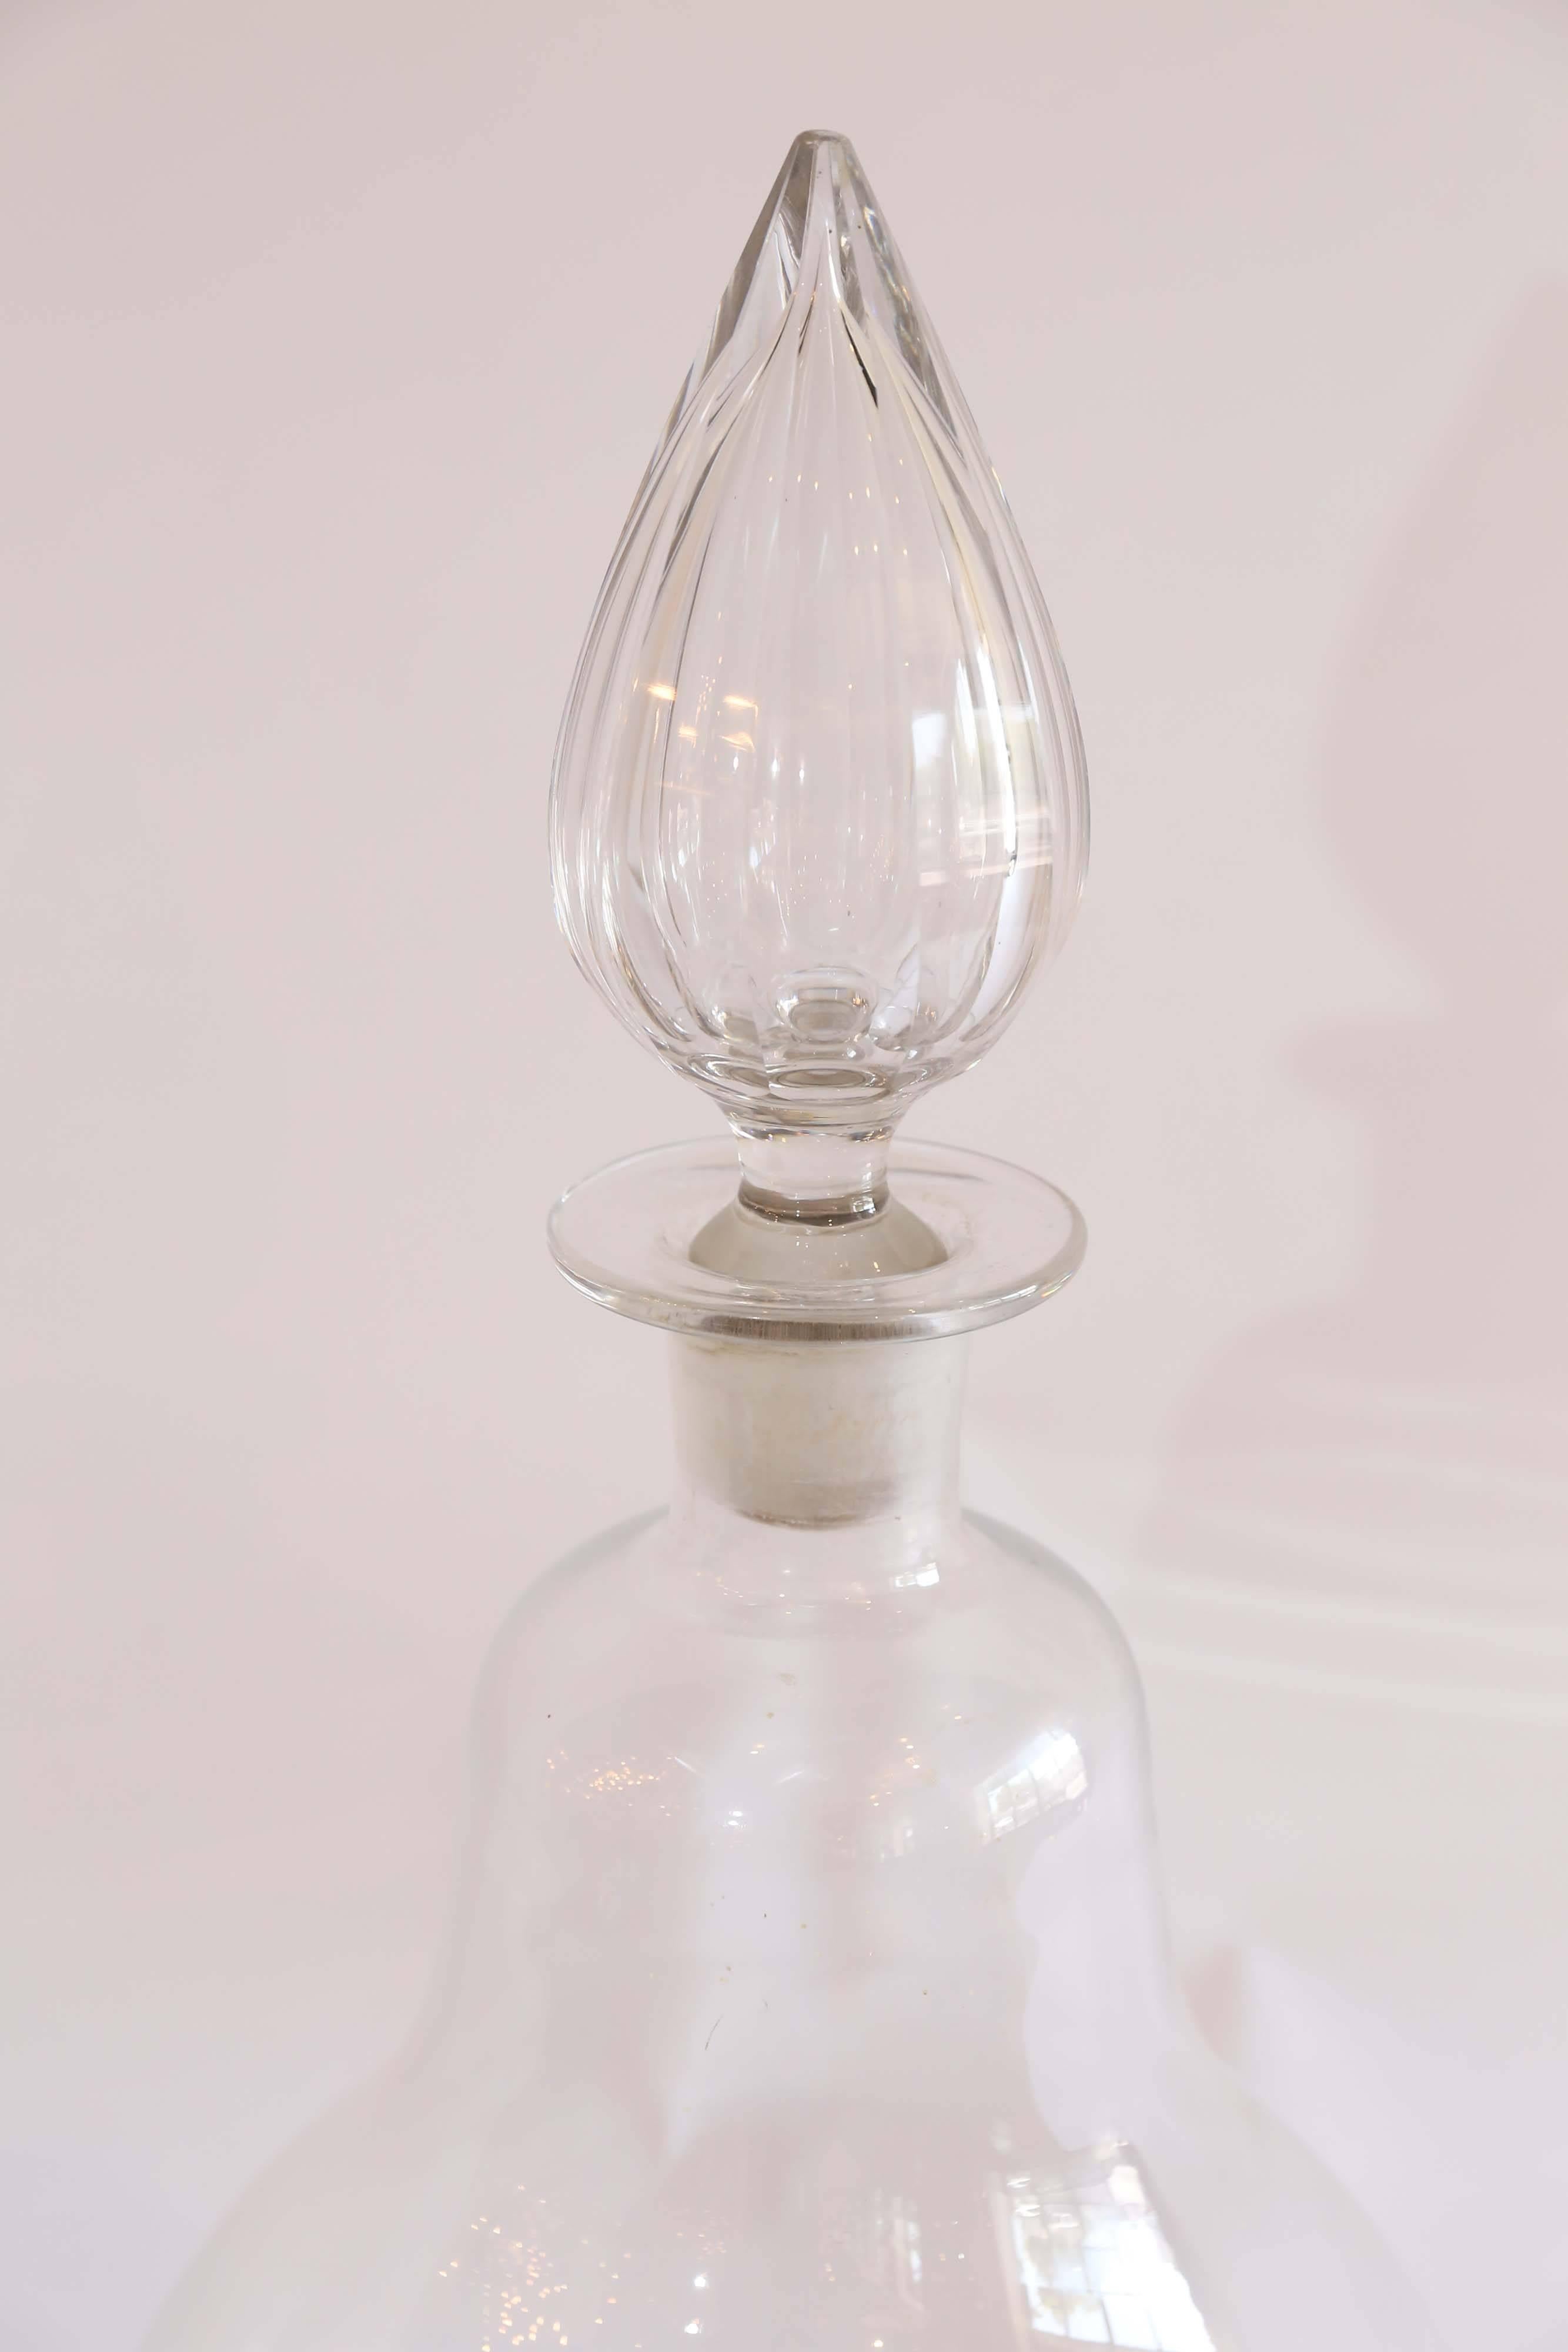 An dramatic and imposing glass apothecary bottle found in France. Grand in size and scale with a massive teardrop shaped glass stopper, this piece is truly dazzling.